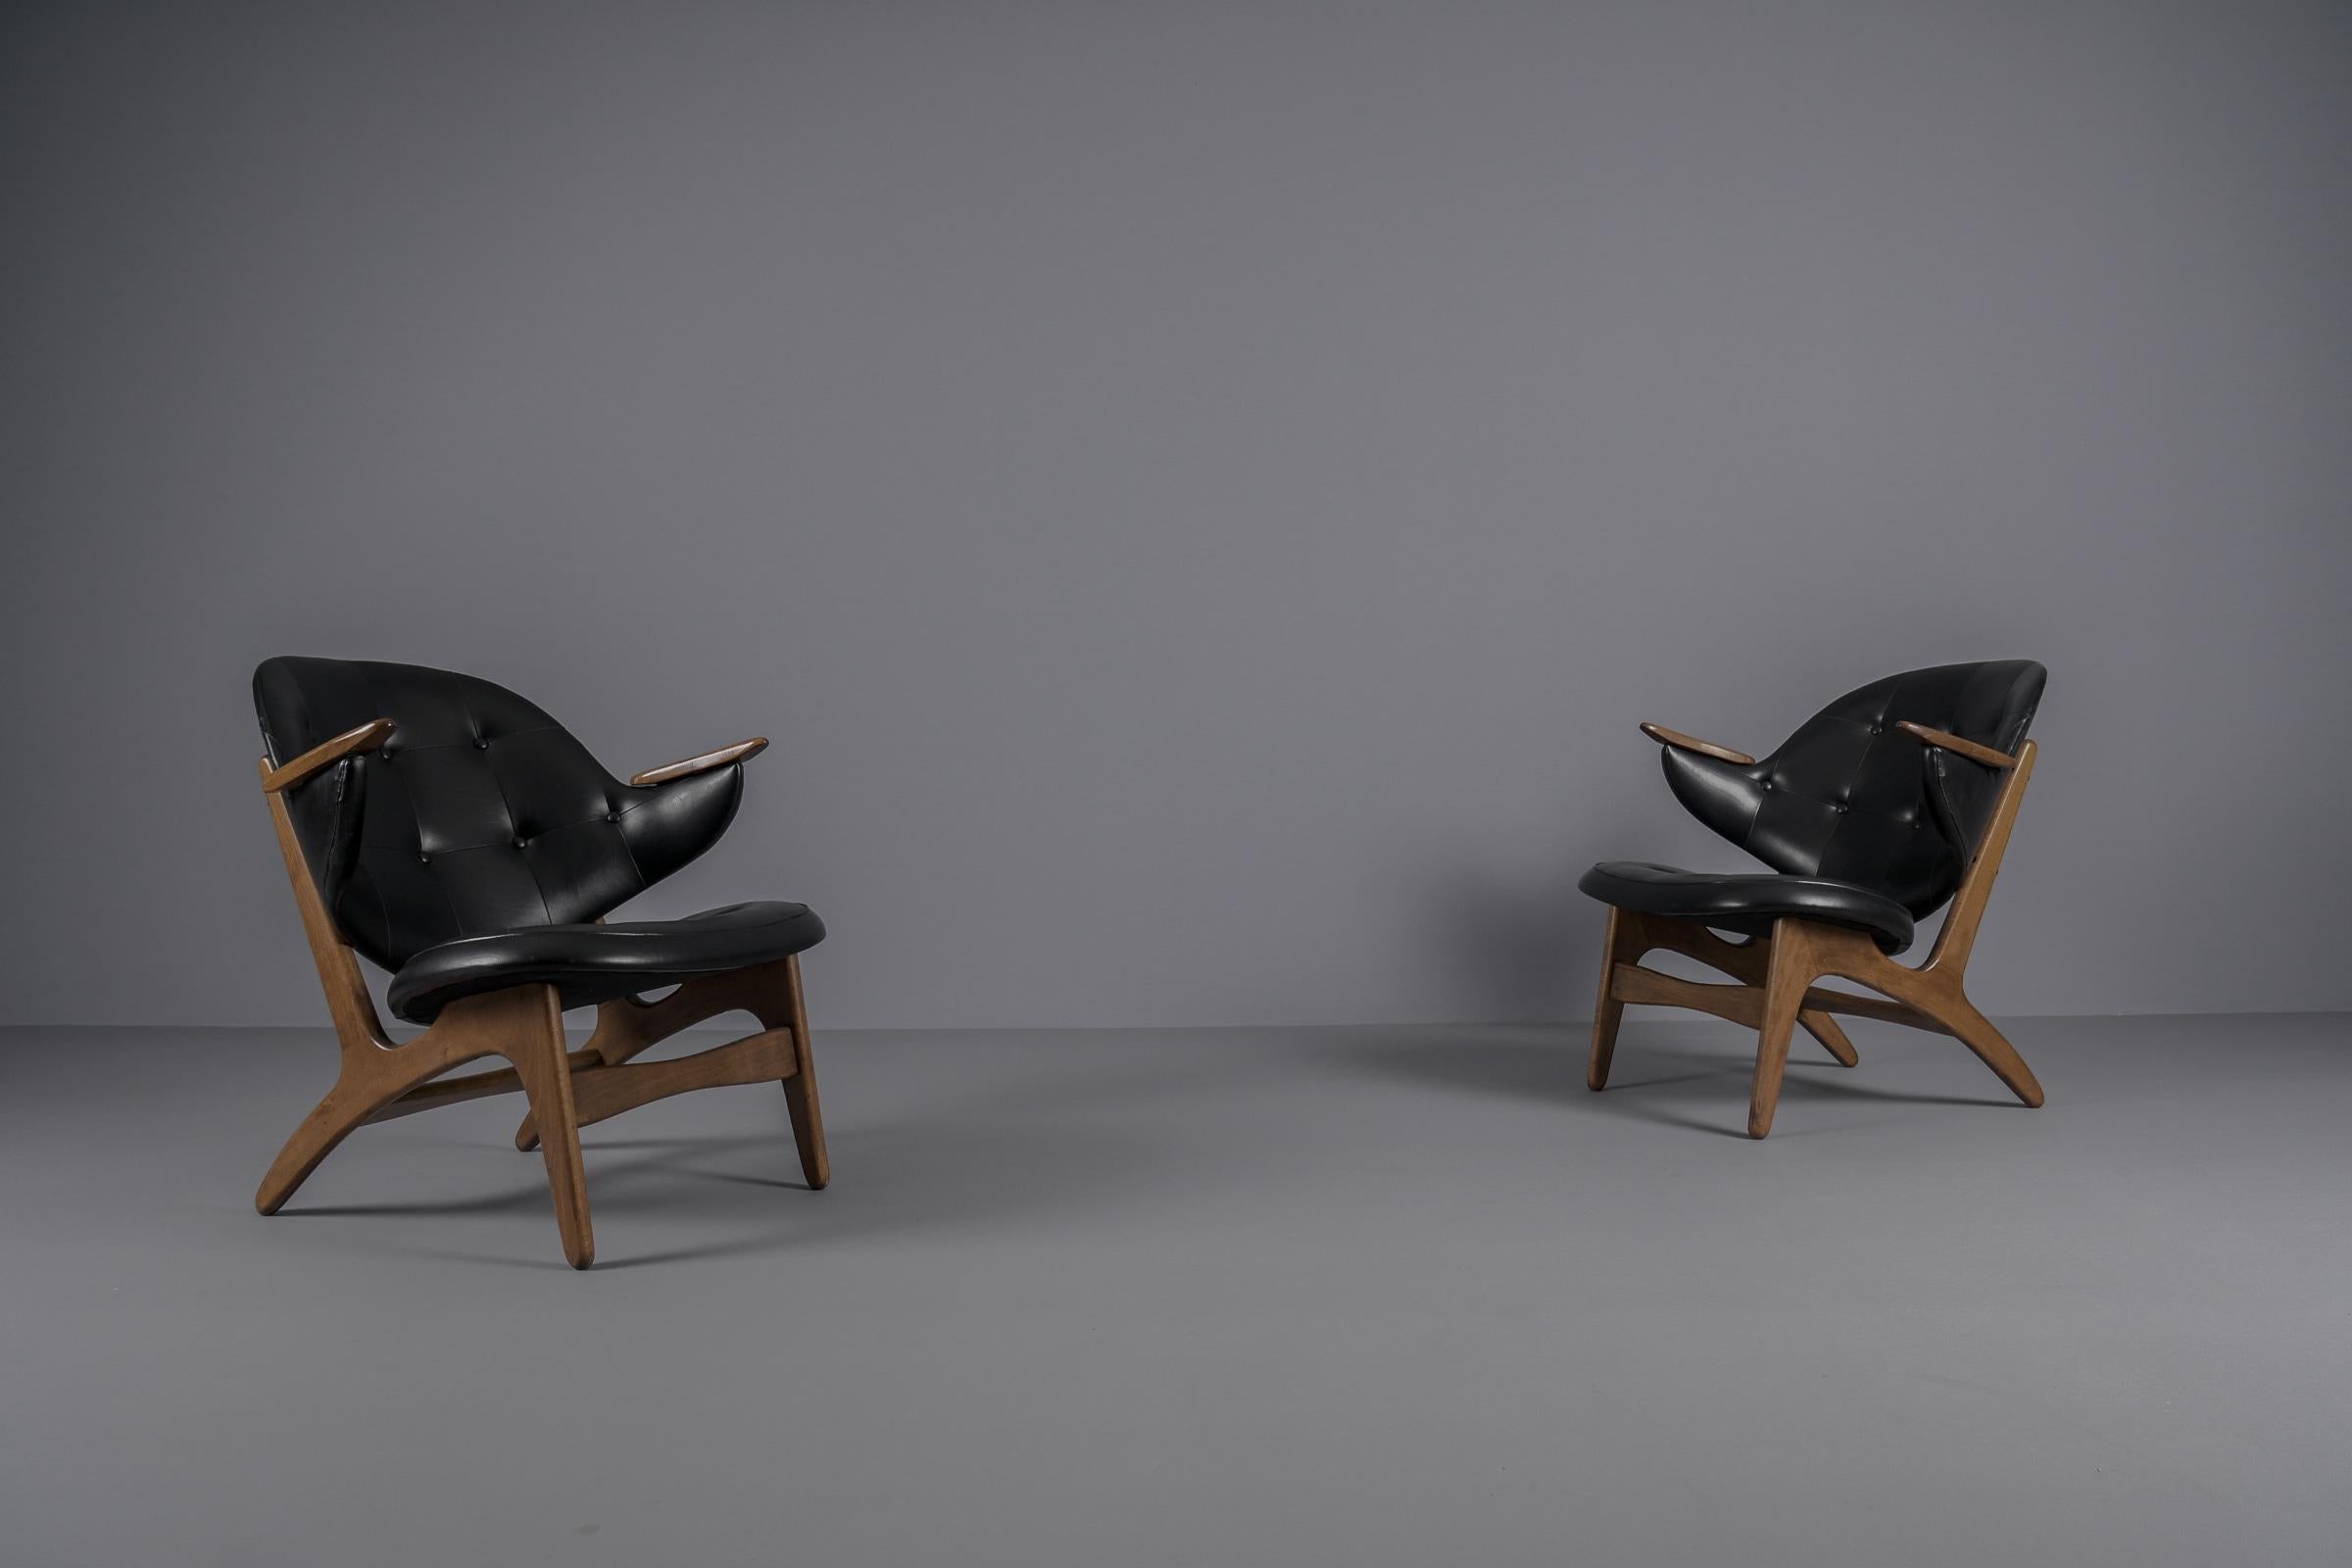 Set of 4 Rare Model 33 Danish Easy Chairs Designed by Carl Edward Matthes, 1950s For Sale 1